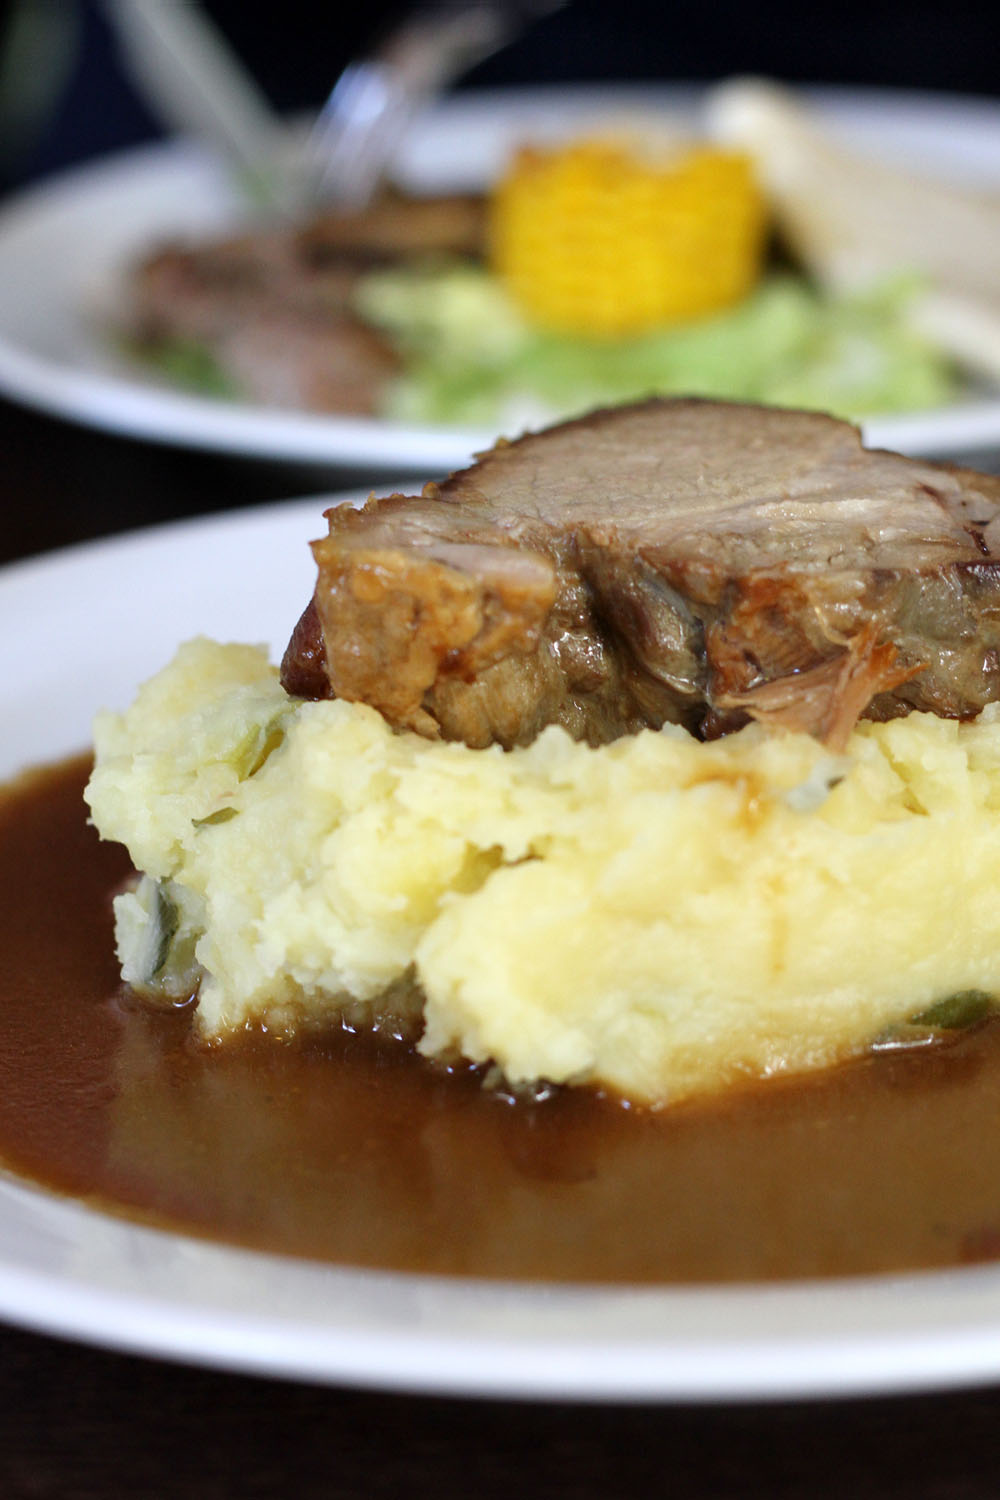 Farmer's pork in dark beer with mashed potatoes